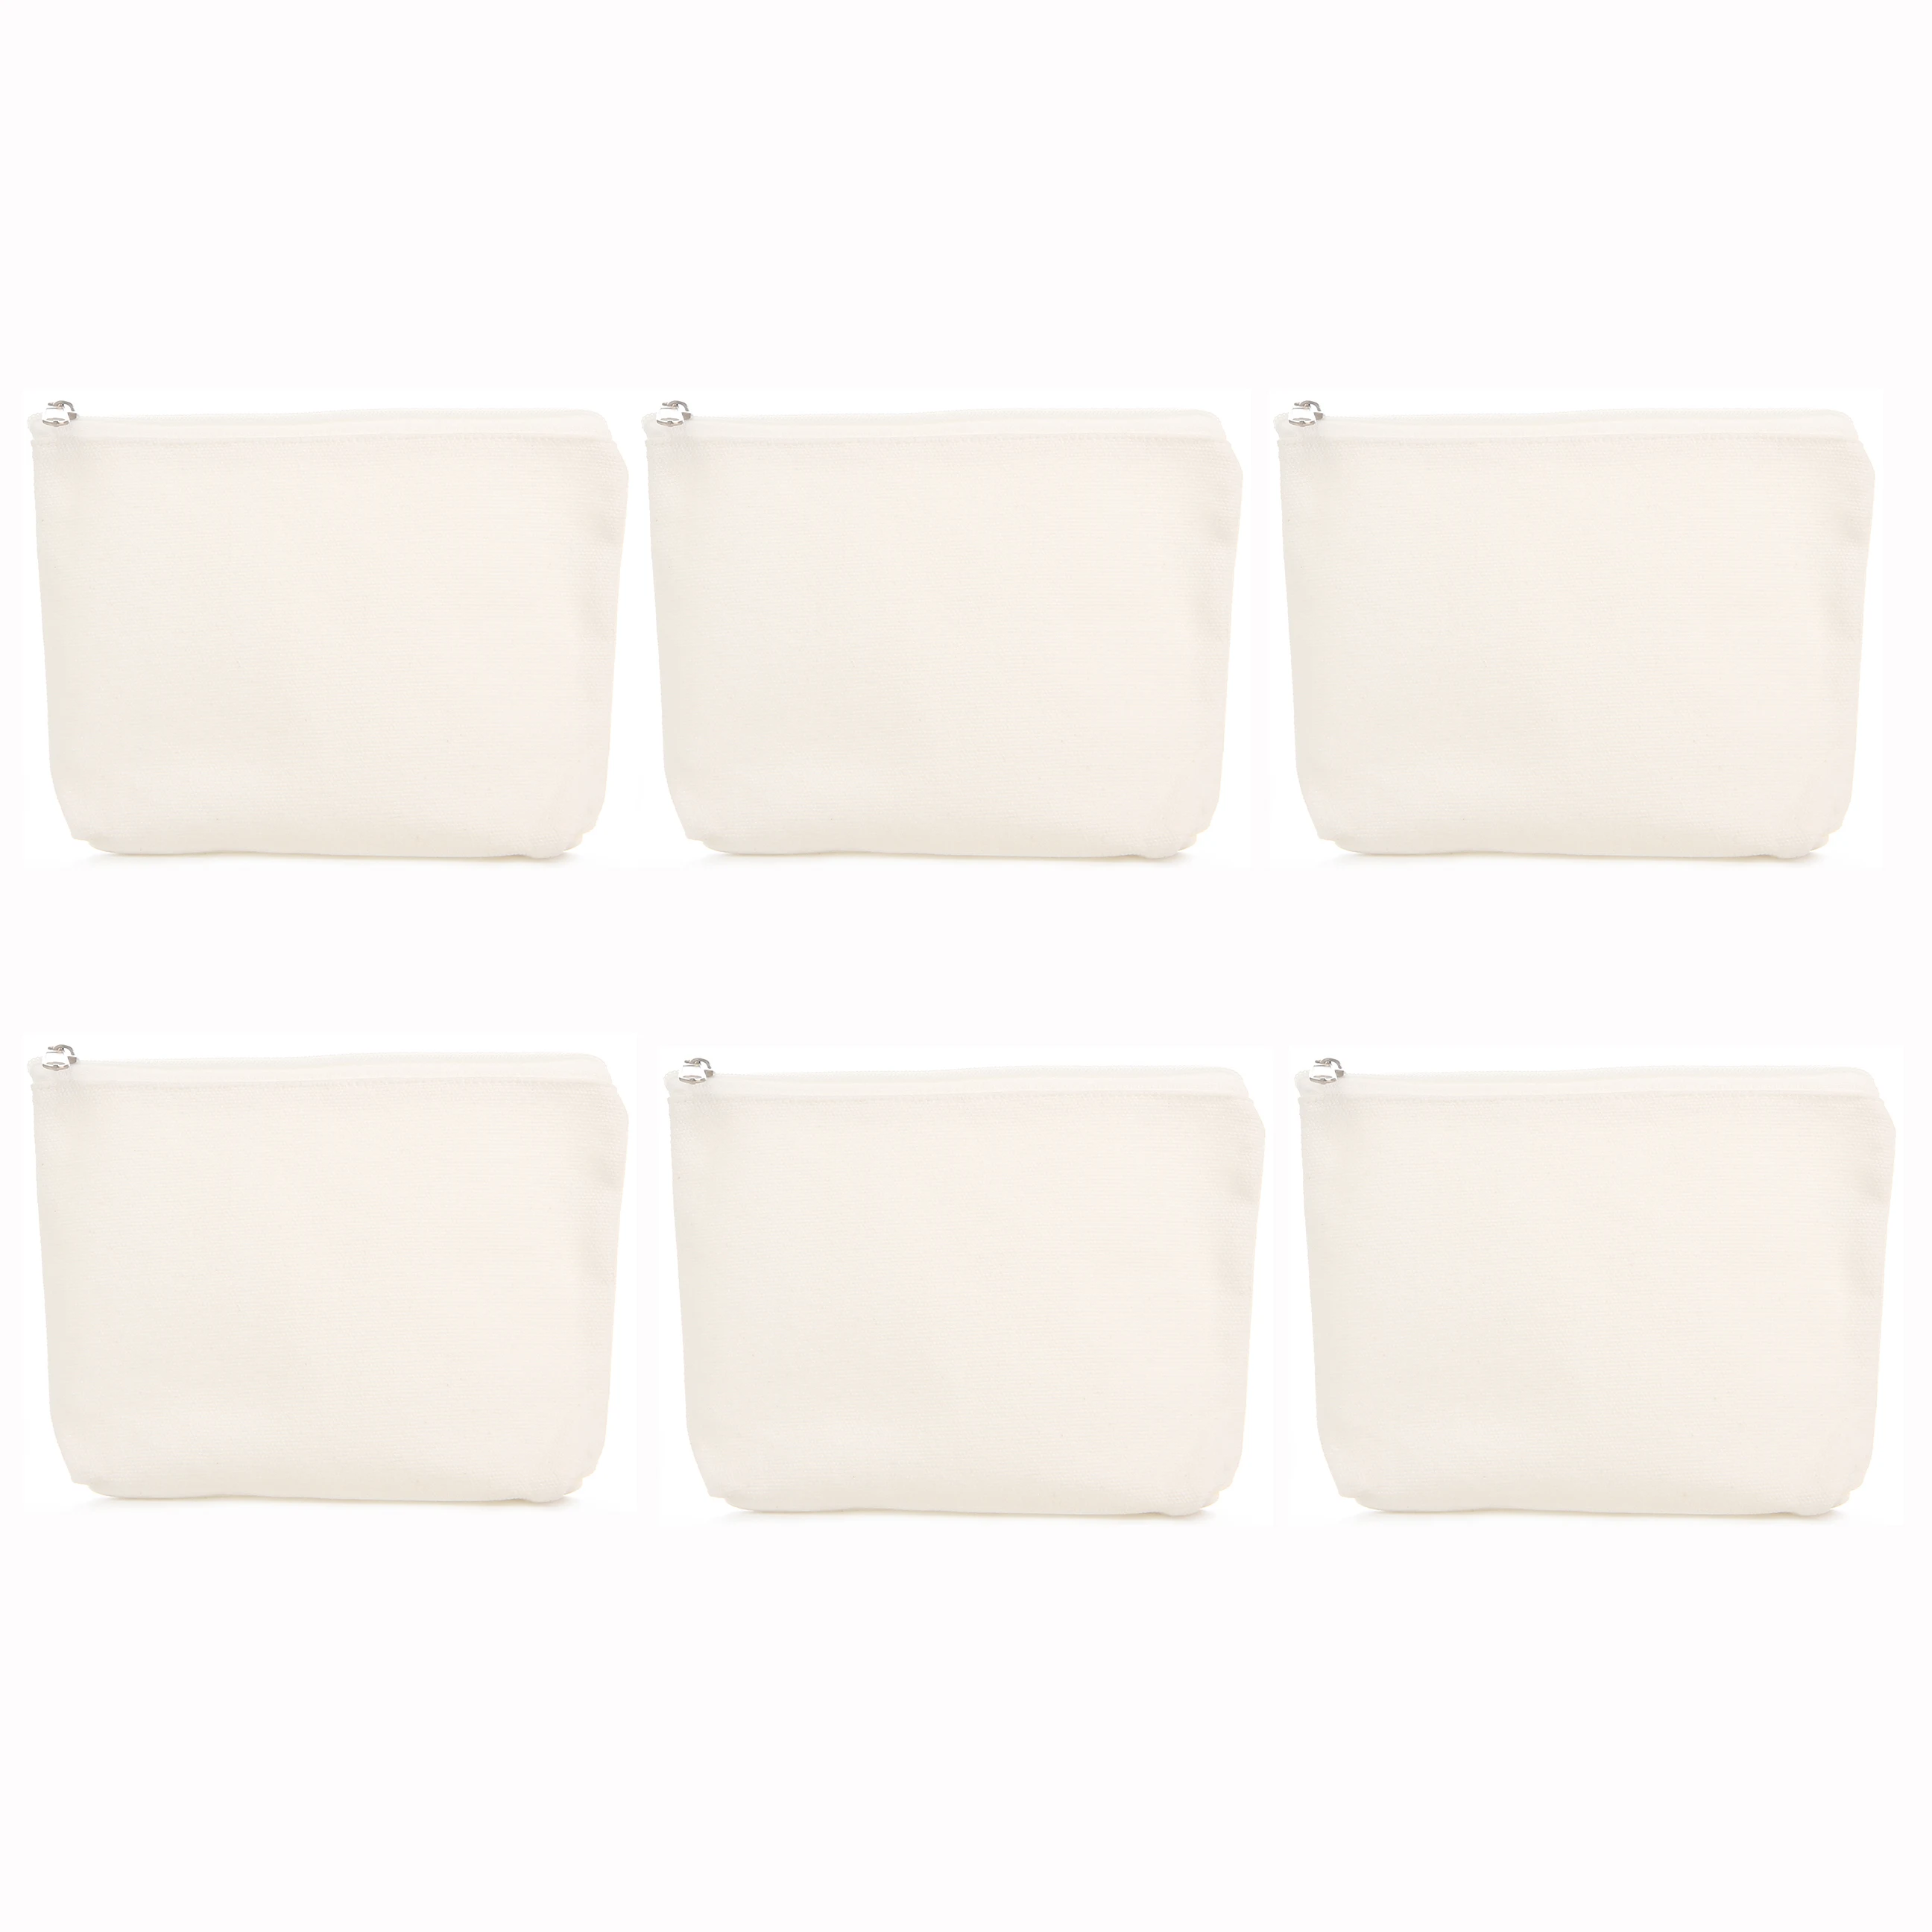 

Bright Creations Canvas Makeup Bags with Zipper (6 Pack) 6 x 5 Inches, Off White DIY Cosmatic Bag